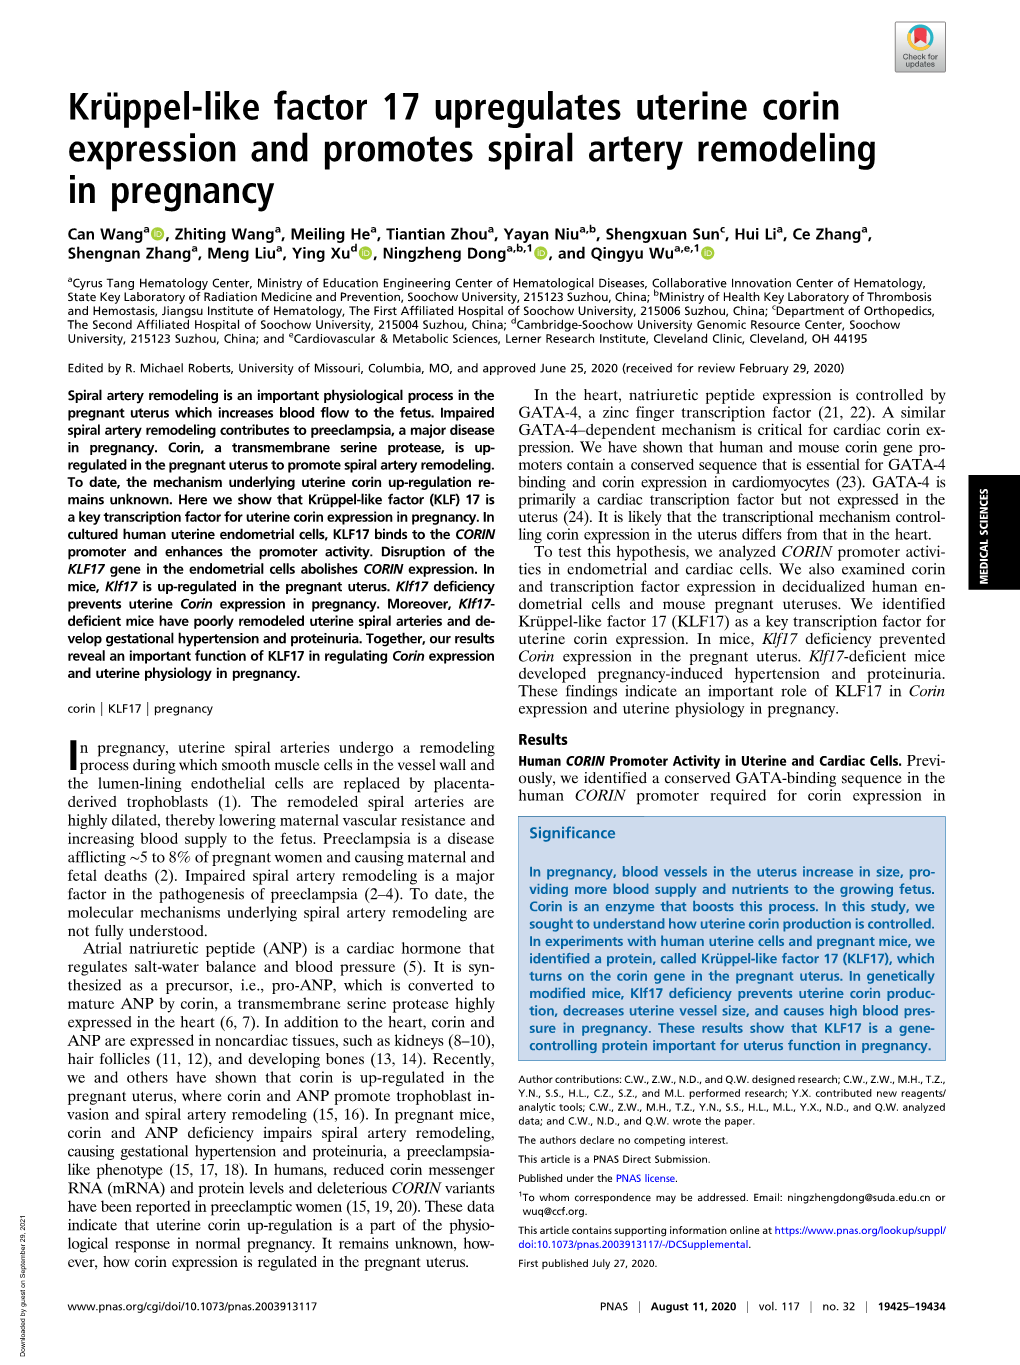 Krüppel-Like Factor 17 Upregulates Uterine Corin Expression and Promotes Spiral Artery Remodeling in Pregnancy